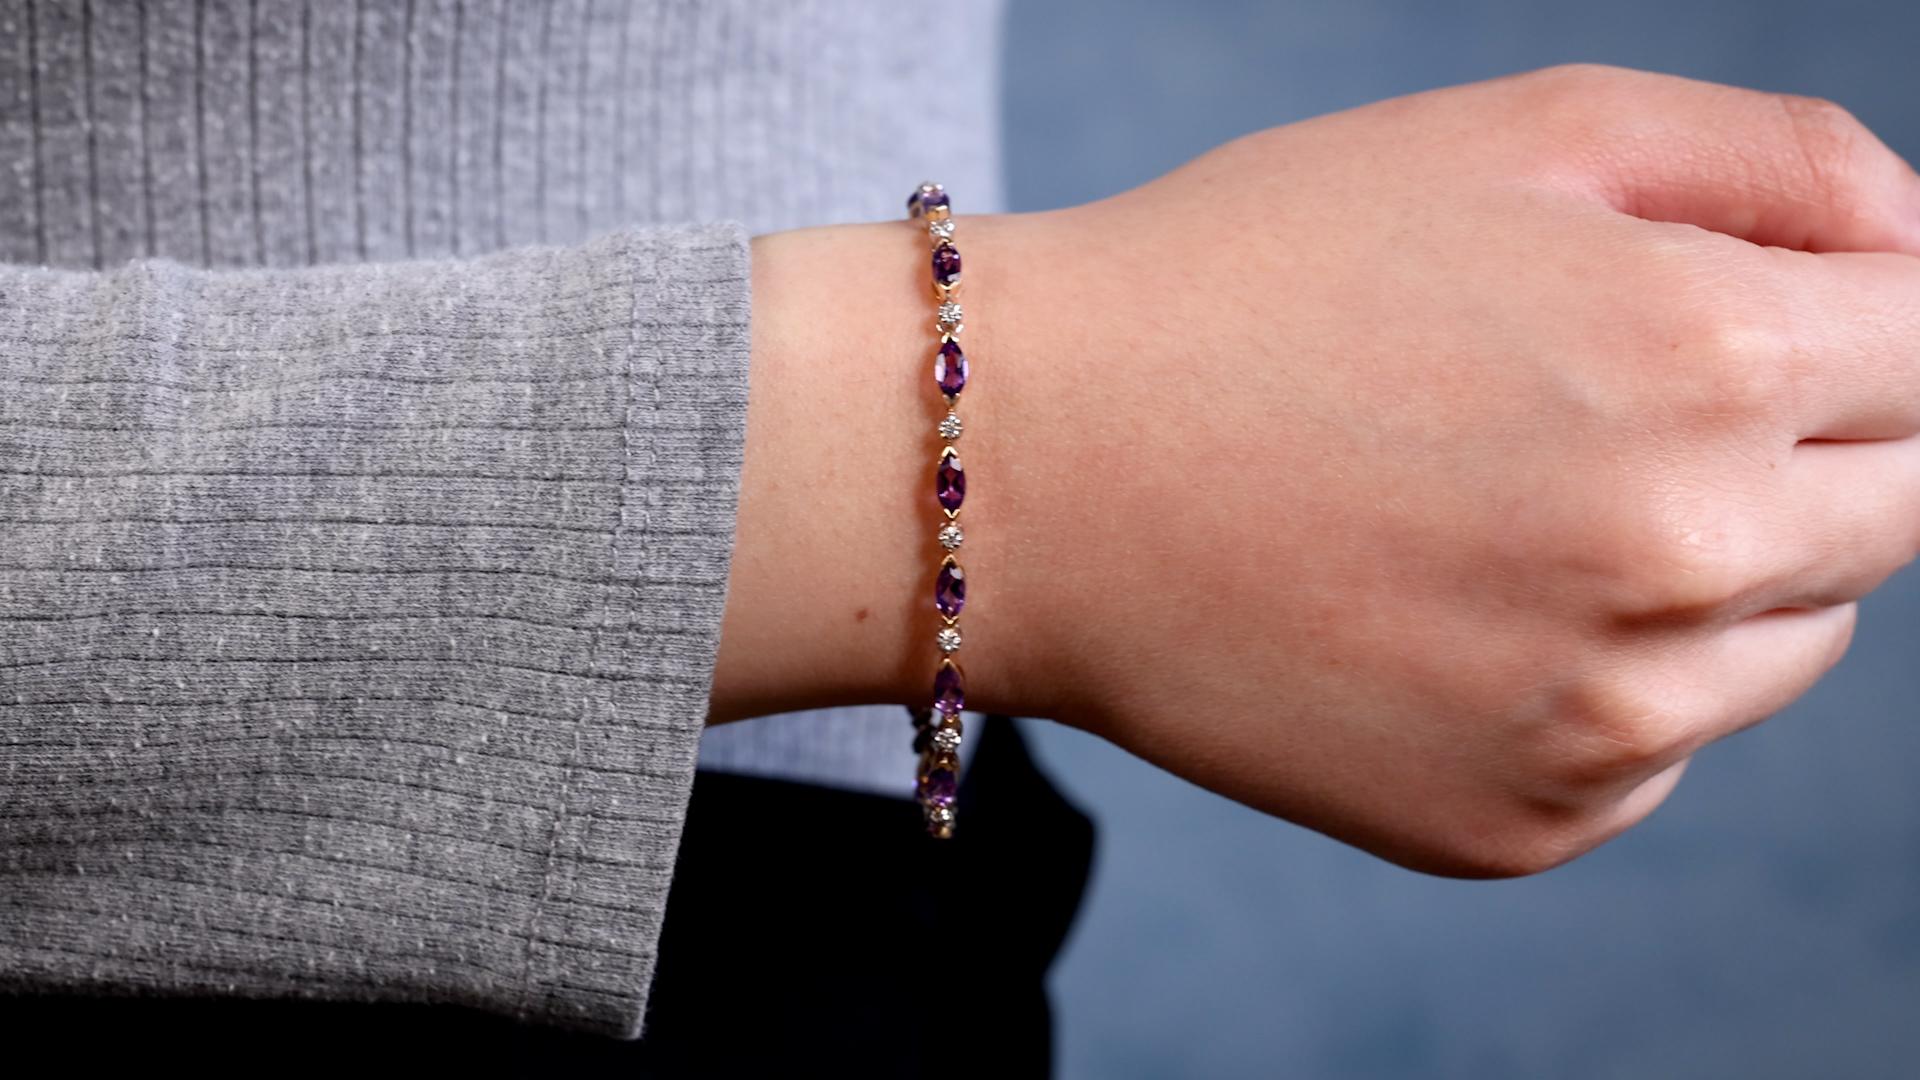 One Retro Amethyst Diamond 14k Gold Bracelet. Featuring 15 marquise cut amethysts with a total weight of 2.35 carats. Accented by 15 single cut diamonds with a total weight of 0.15 carat, graded I-J color, SI clarity. Crafted in 14 karat yellow and